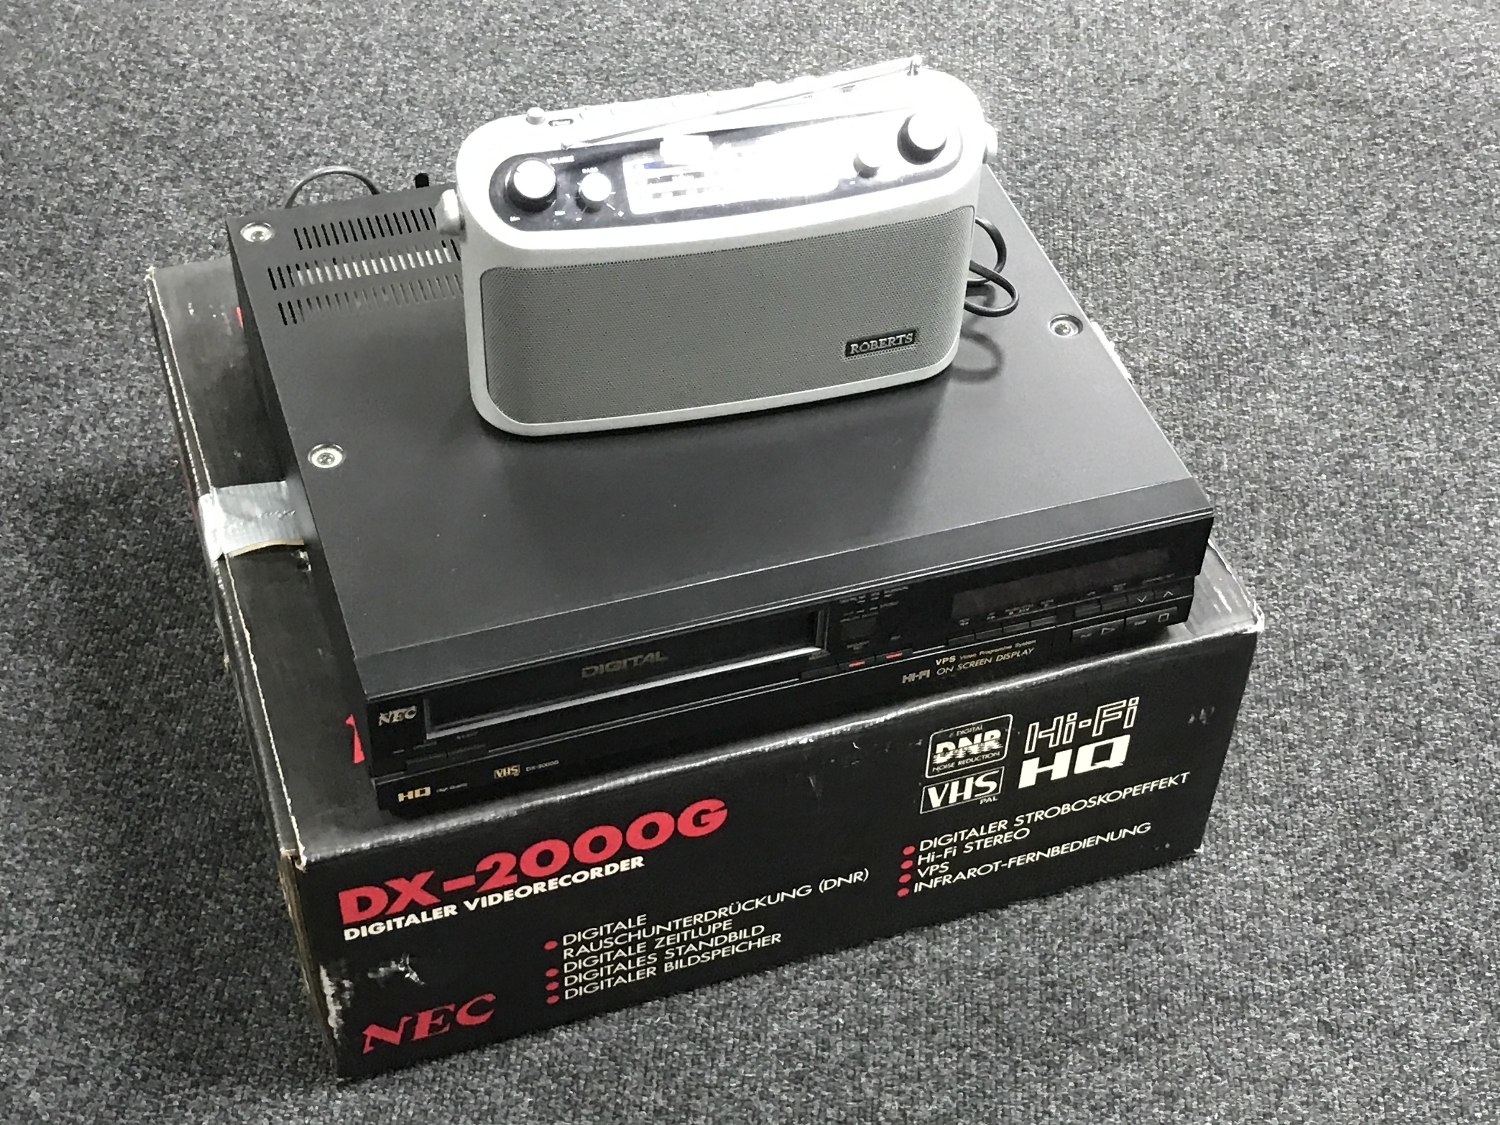 An Nec DX-2000G digital video recorder in original box together with a Roberts radio